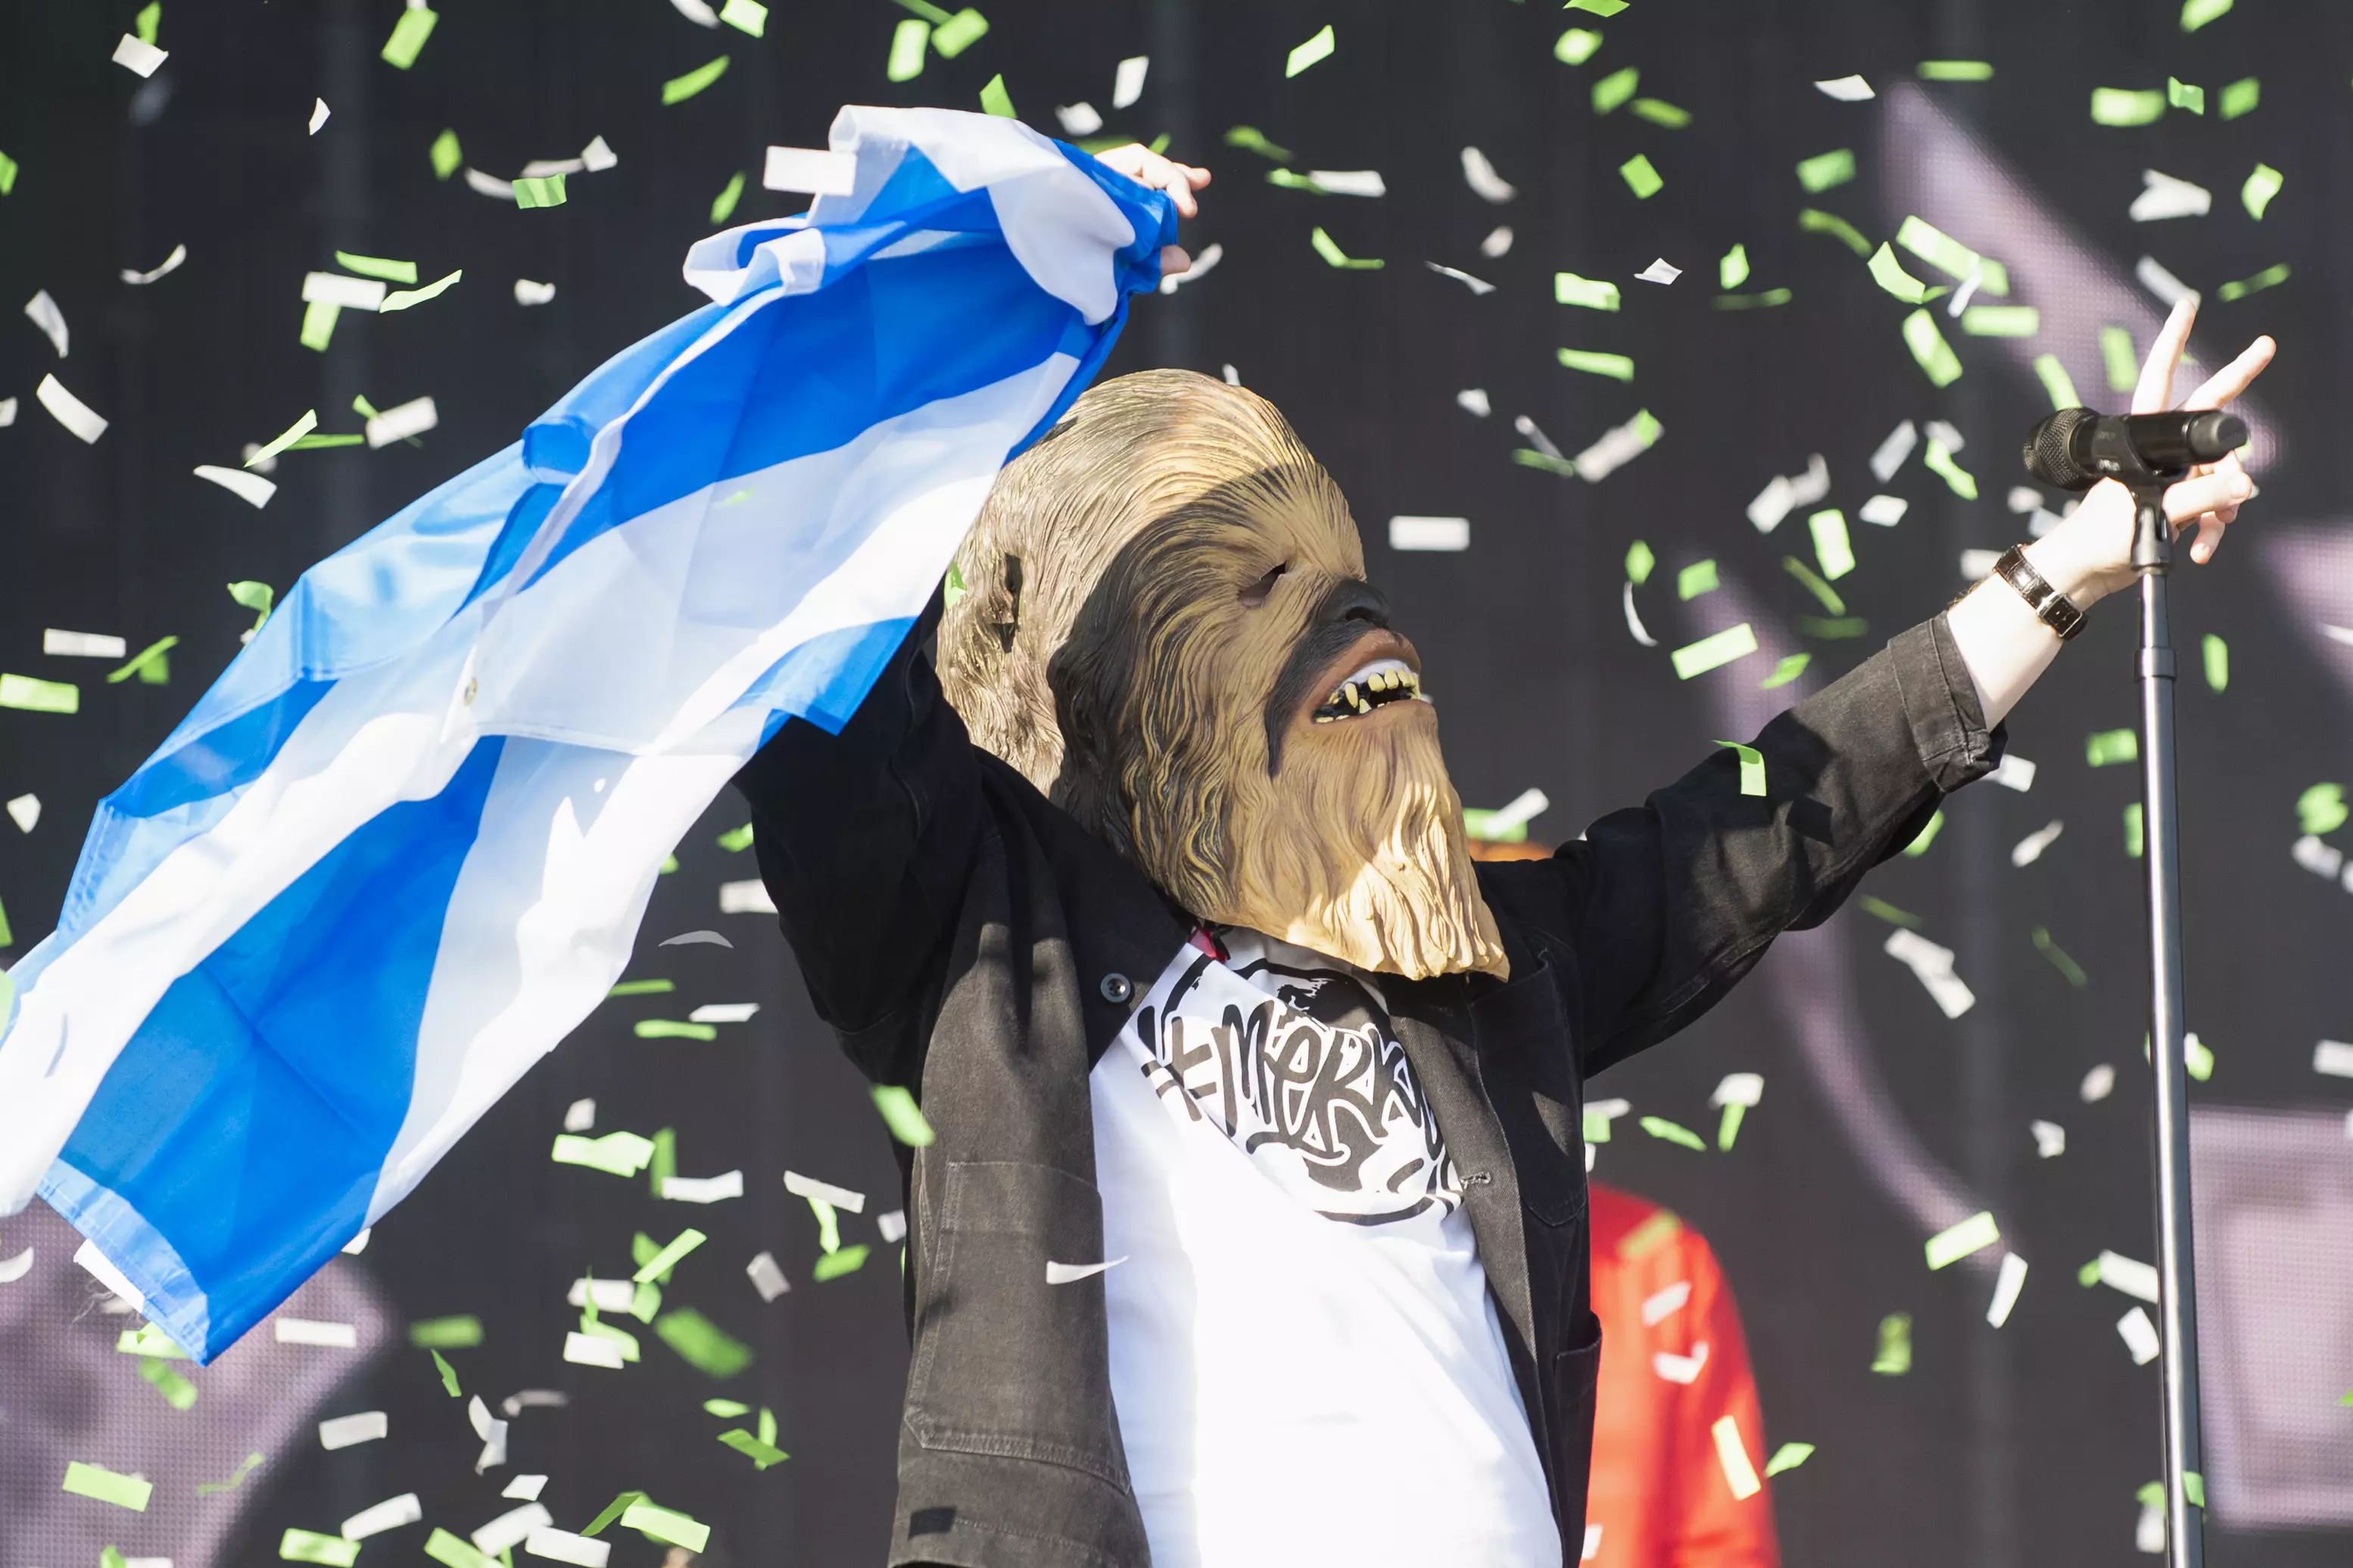 The mask was made famous by Lewis Capaldi when he wore it during his set at TRNSMT Festival.